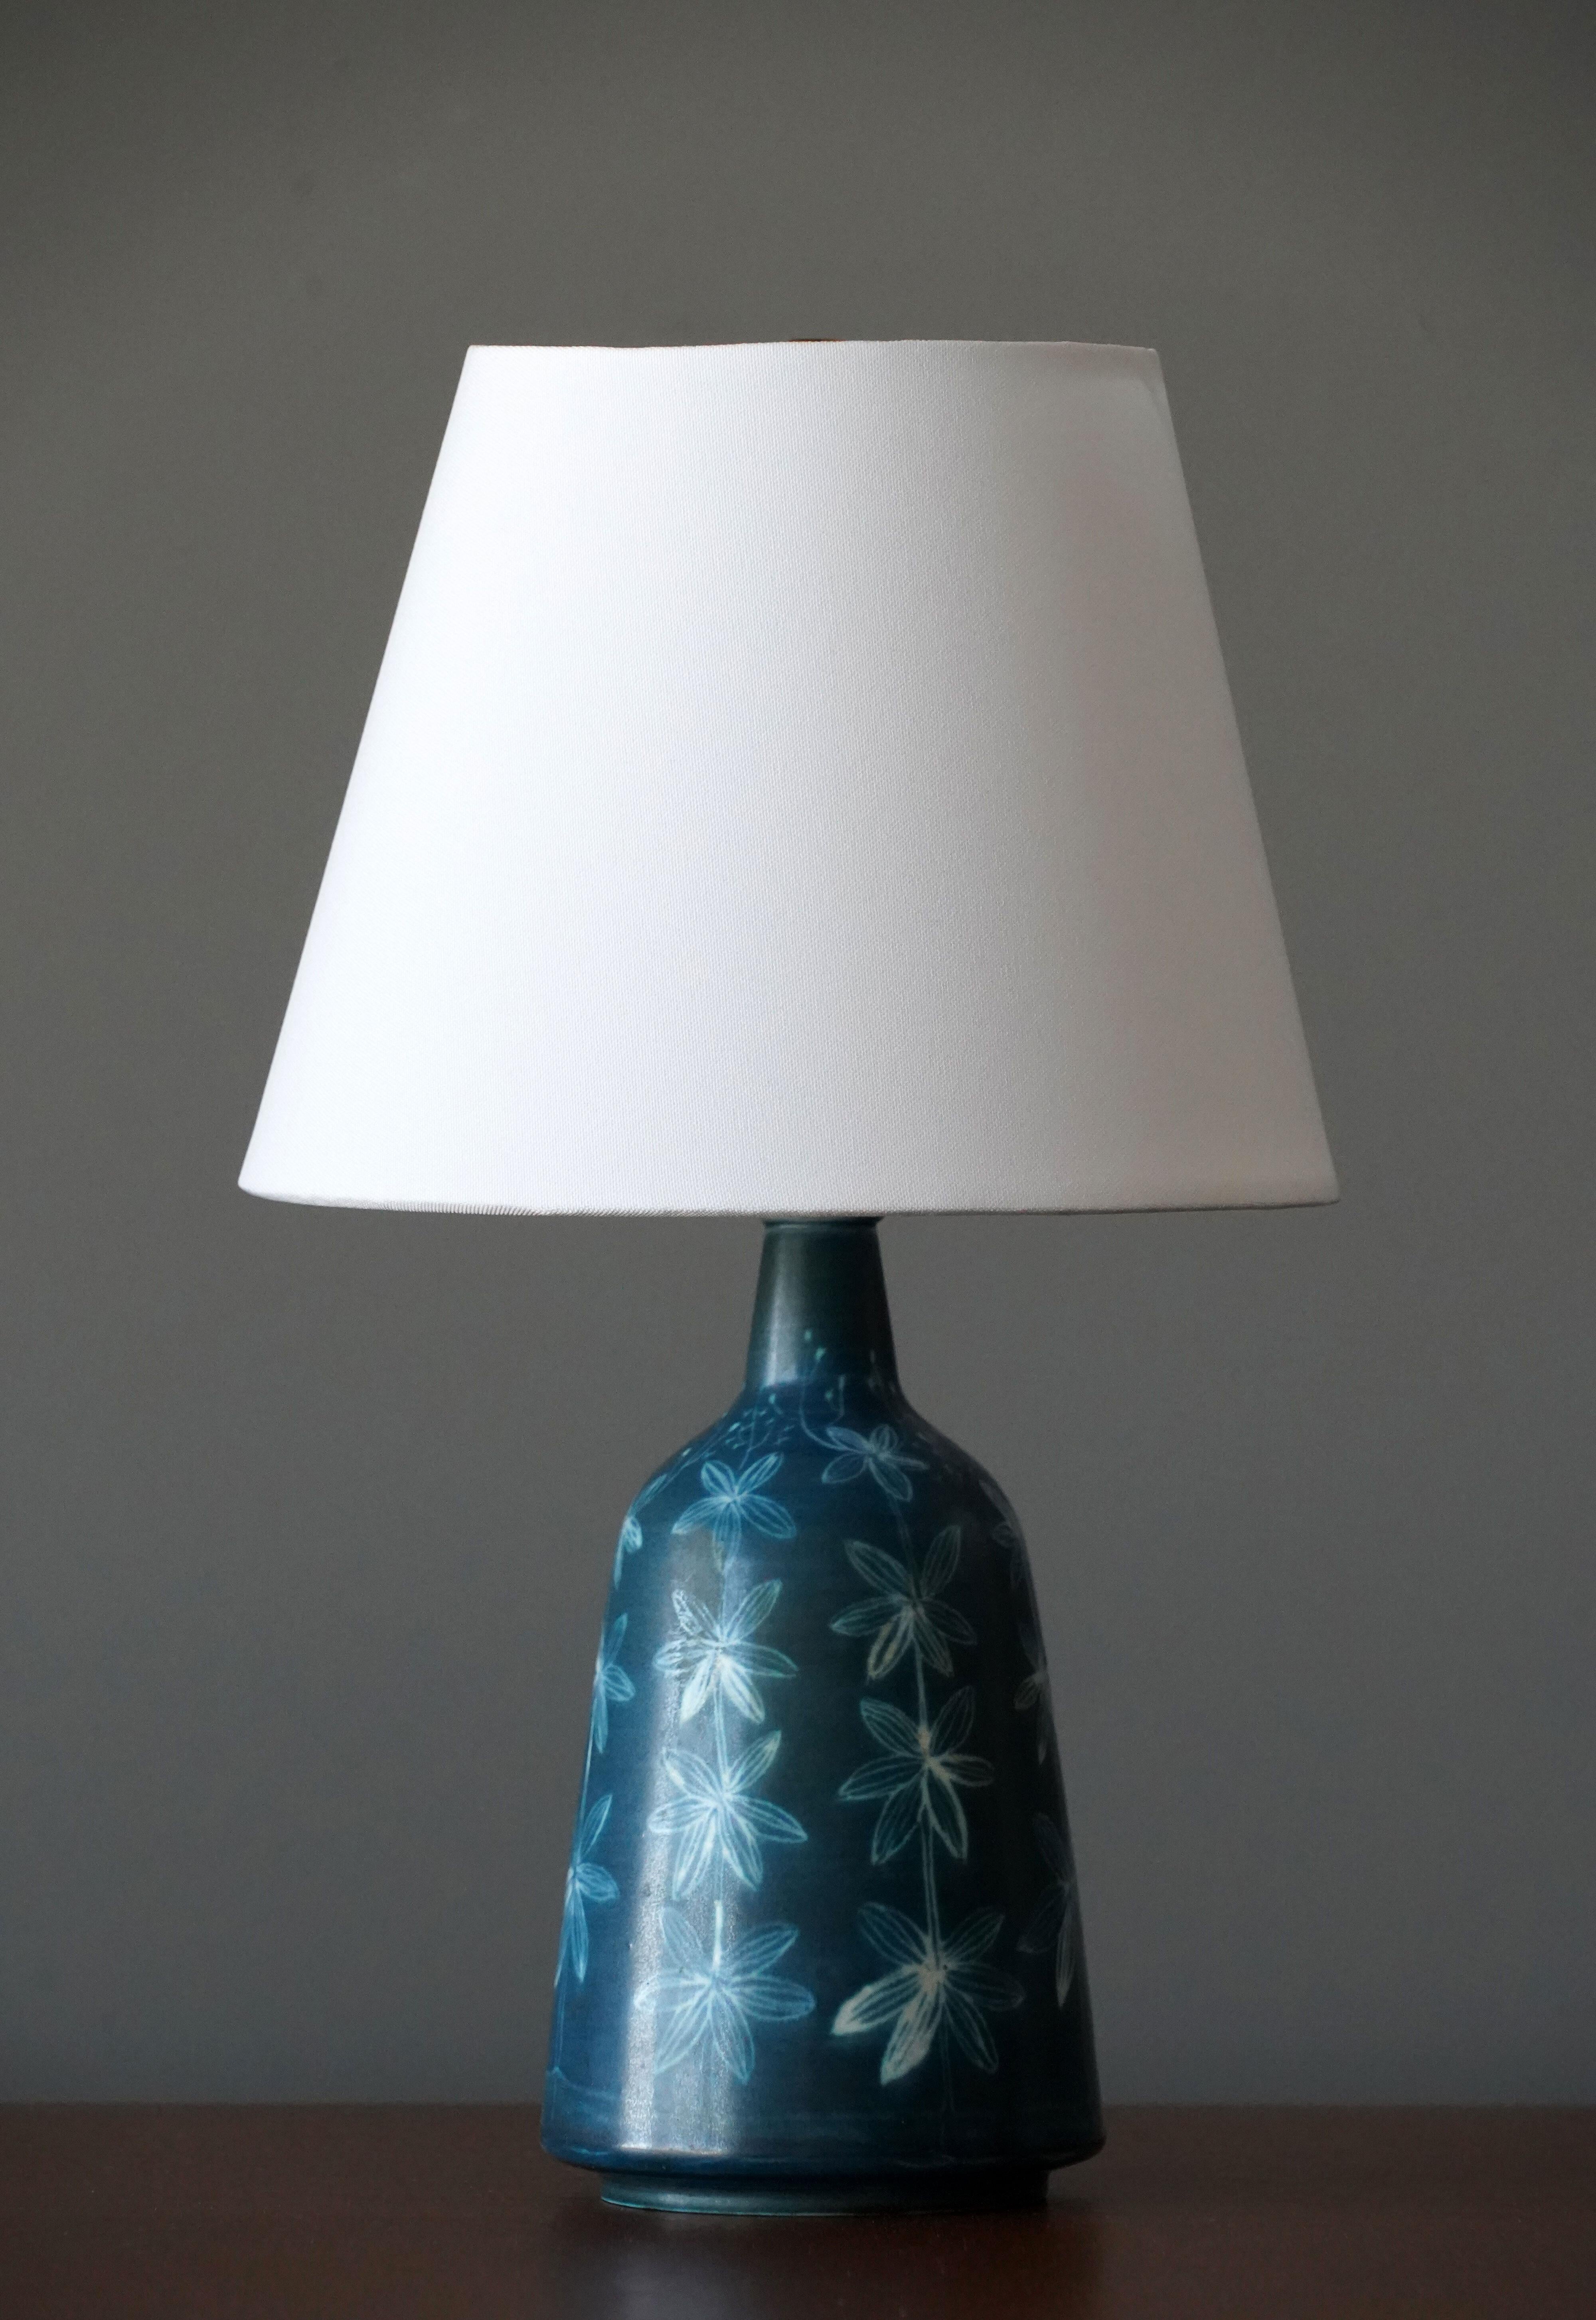 A table lamp produced by Rörstrand. Marked. Features a sculptural form and a highly artistic blue cyantope floral pattern.

Lampshade attached is for illustration, the lamp is offered without a lampshade and stated dimensions are of only the